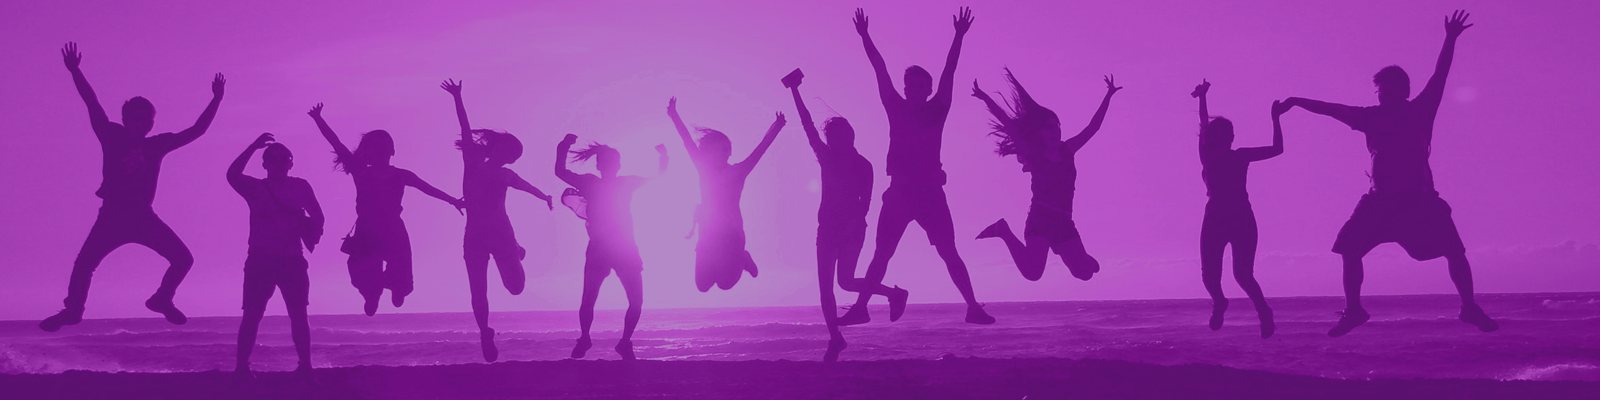 purple silhouette image of people jumping for joy